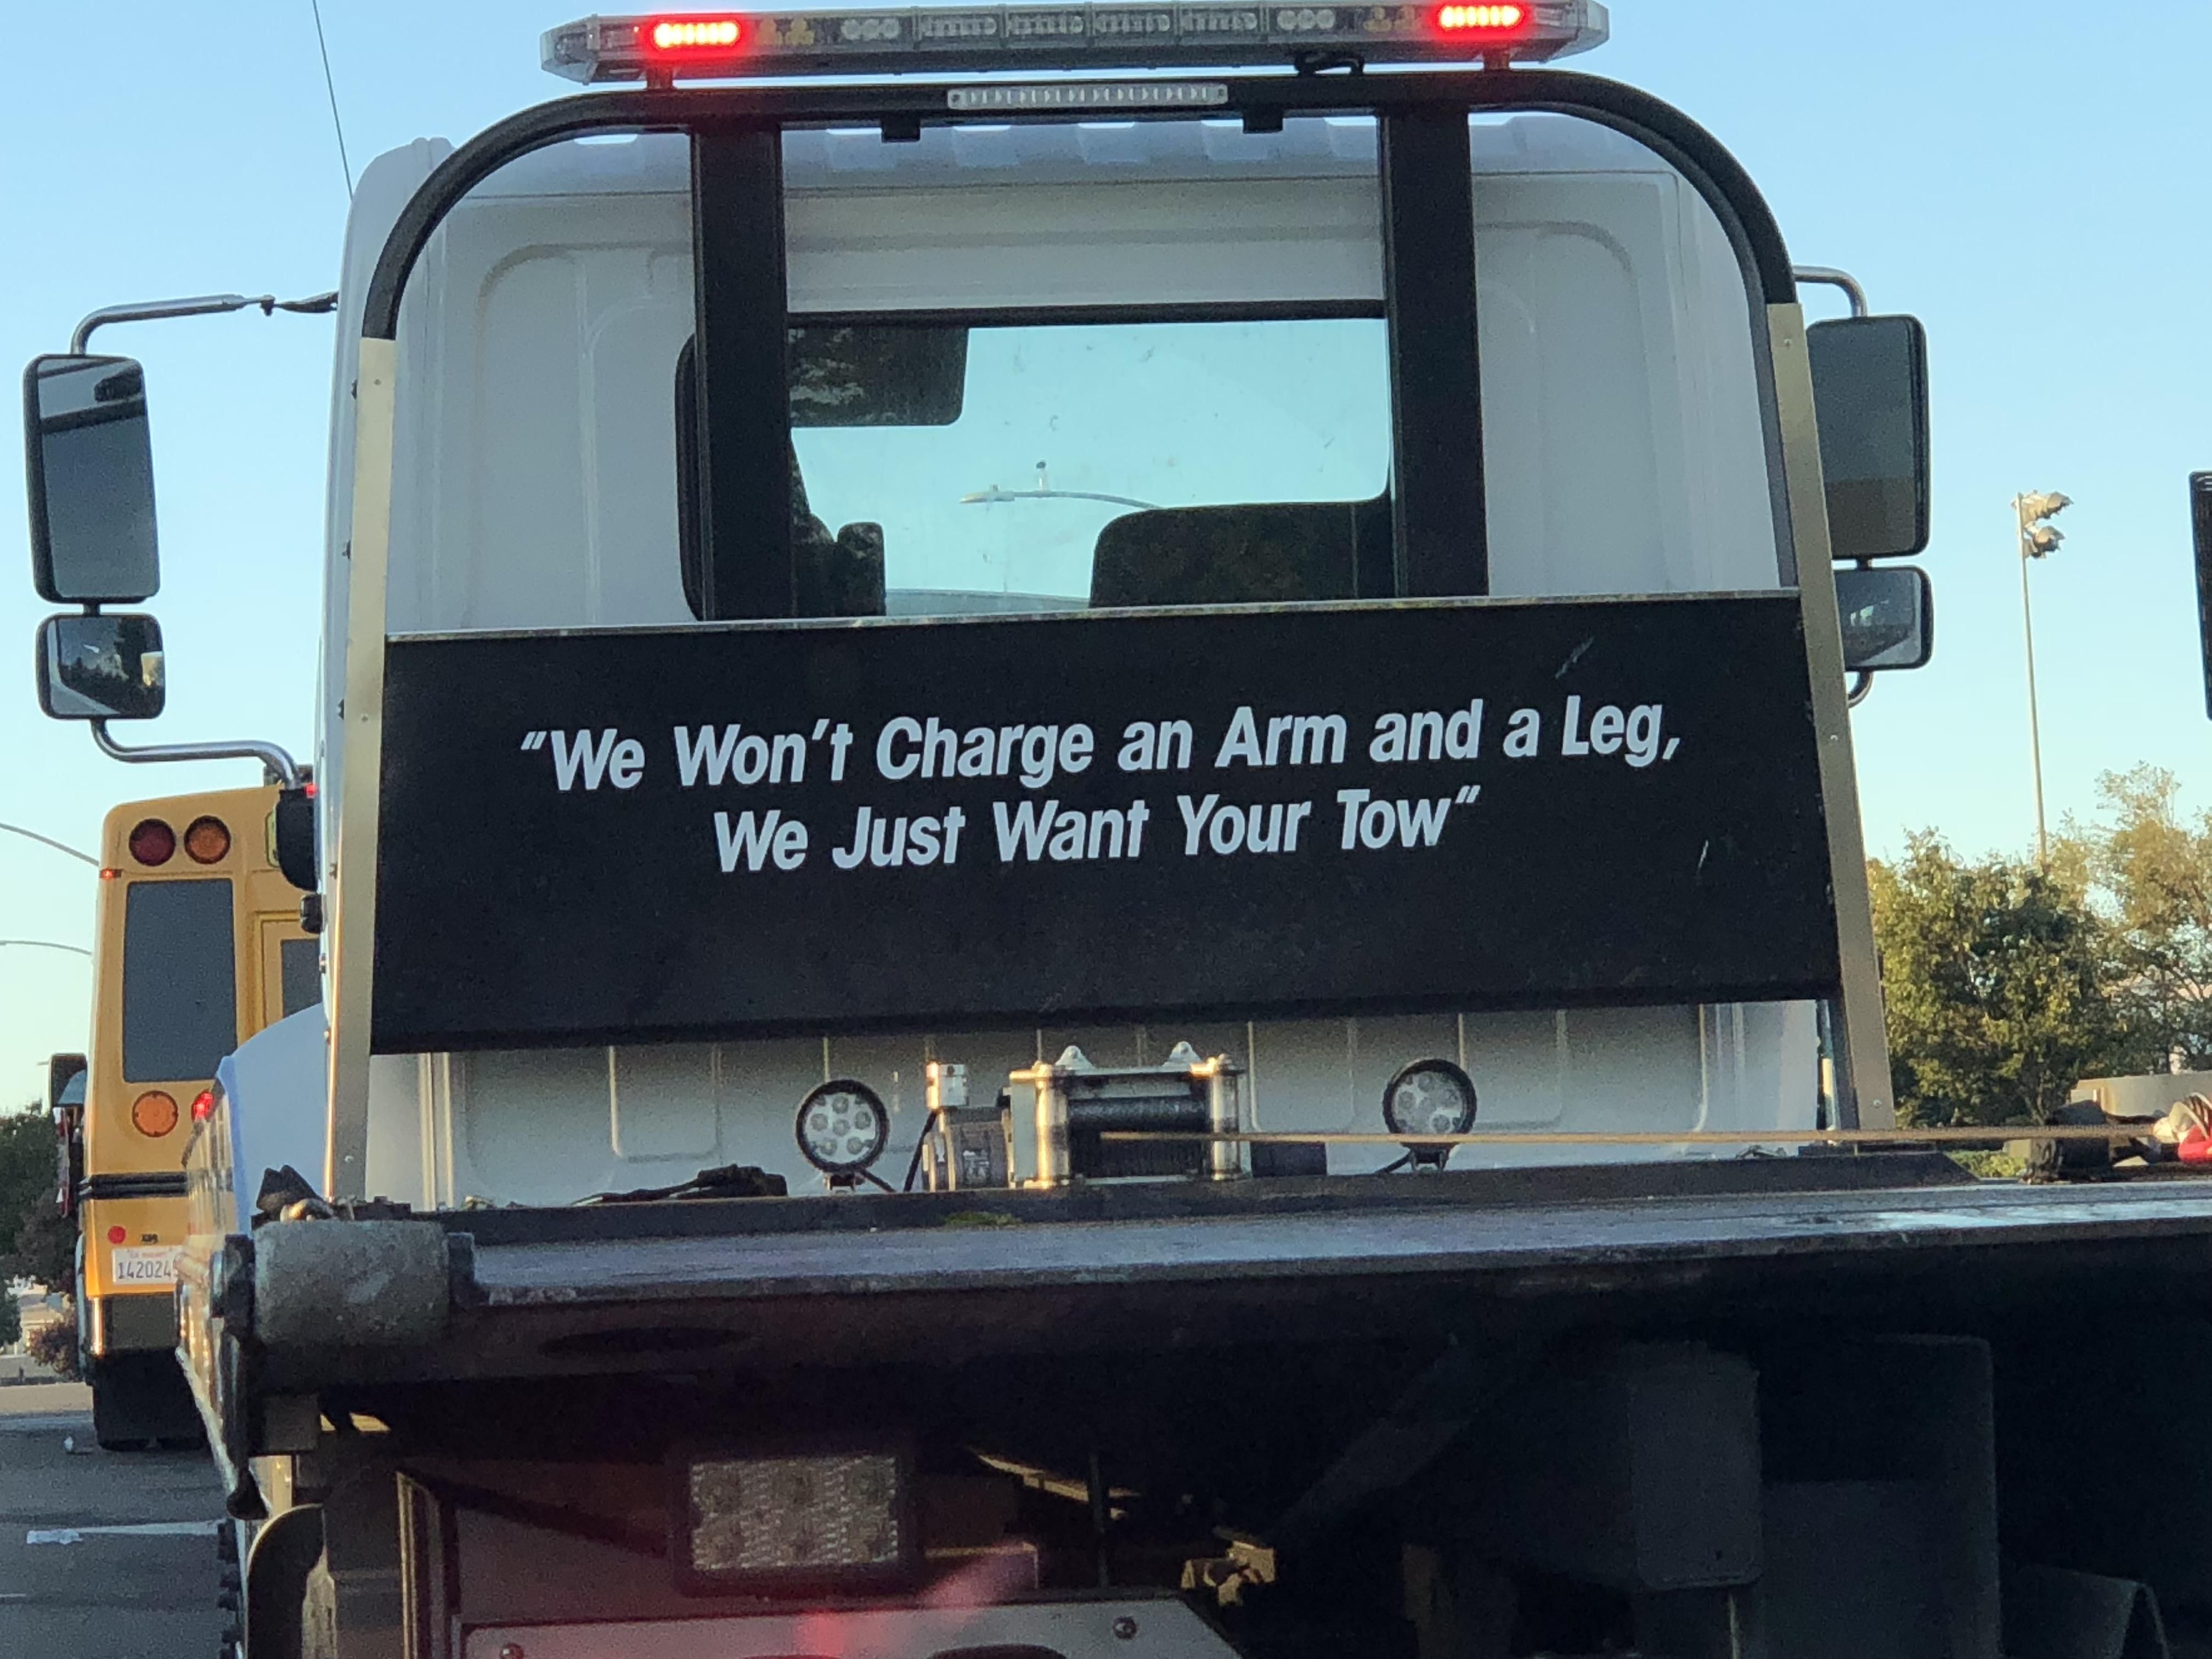 The slogan on this tow truck...